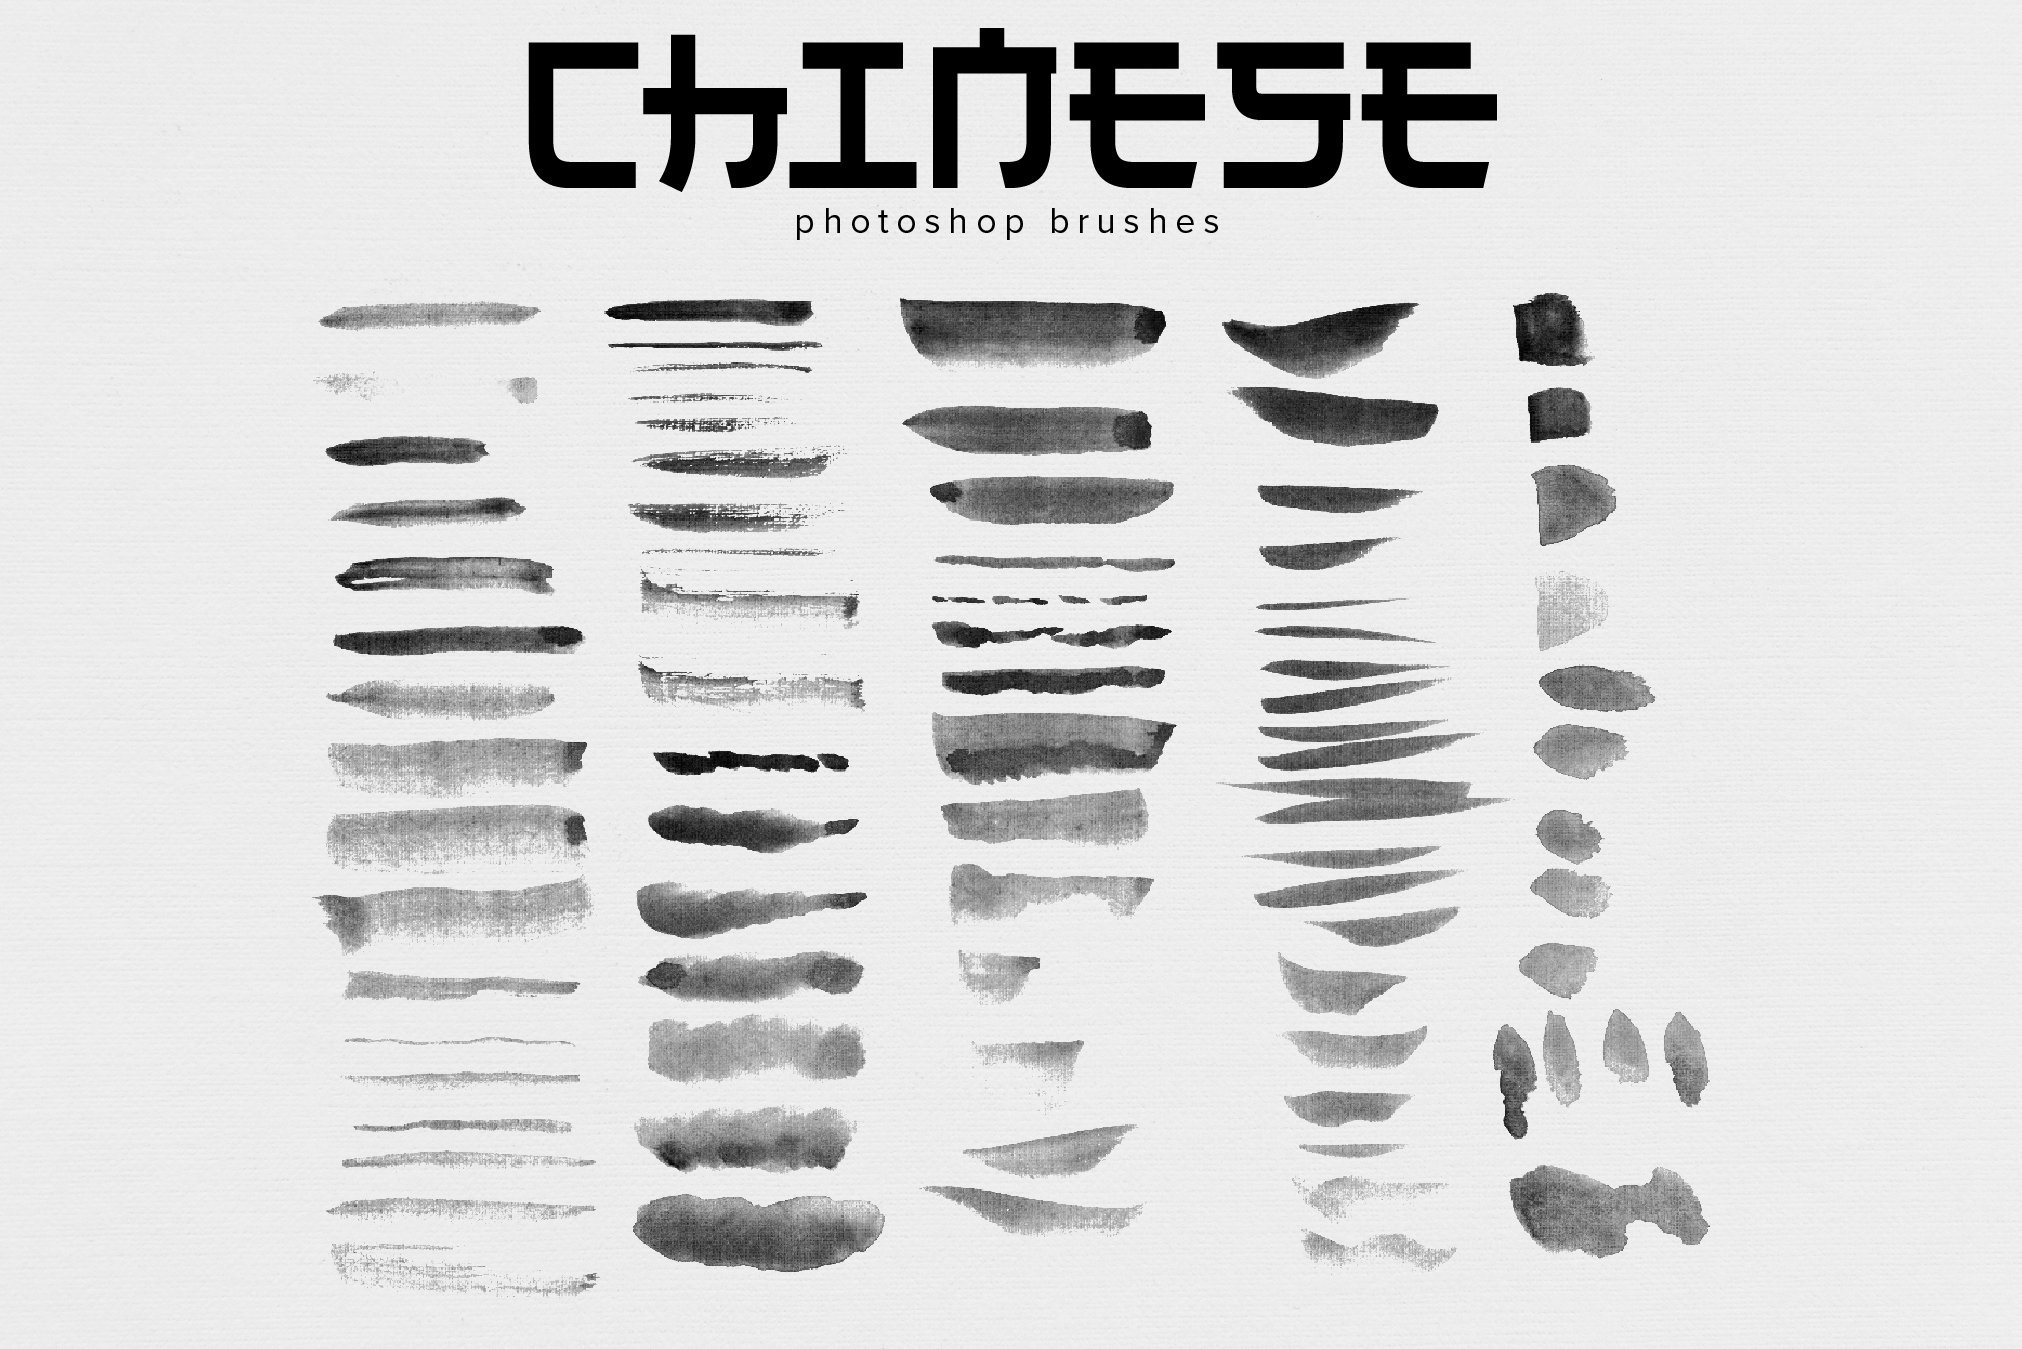 chinese new year photoshop brushes free download